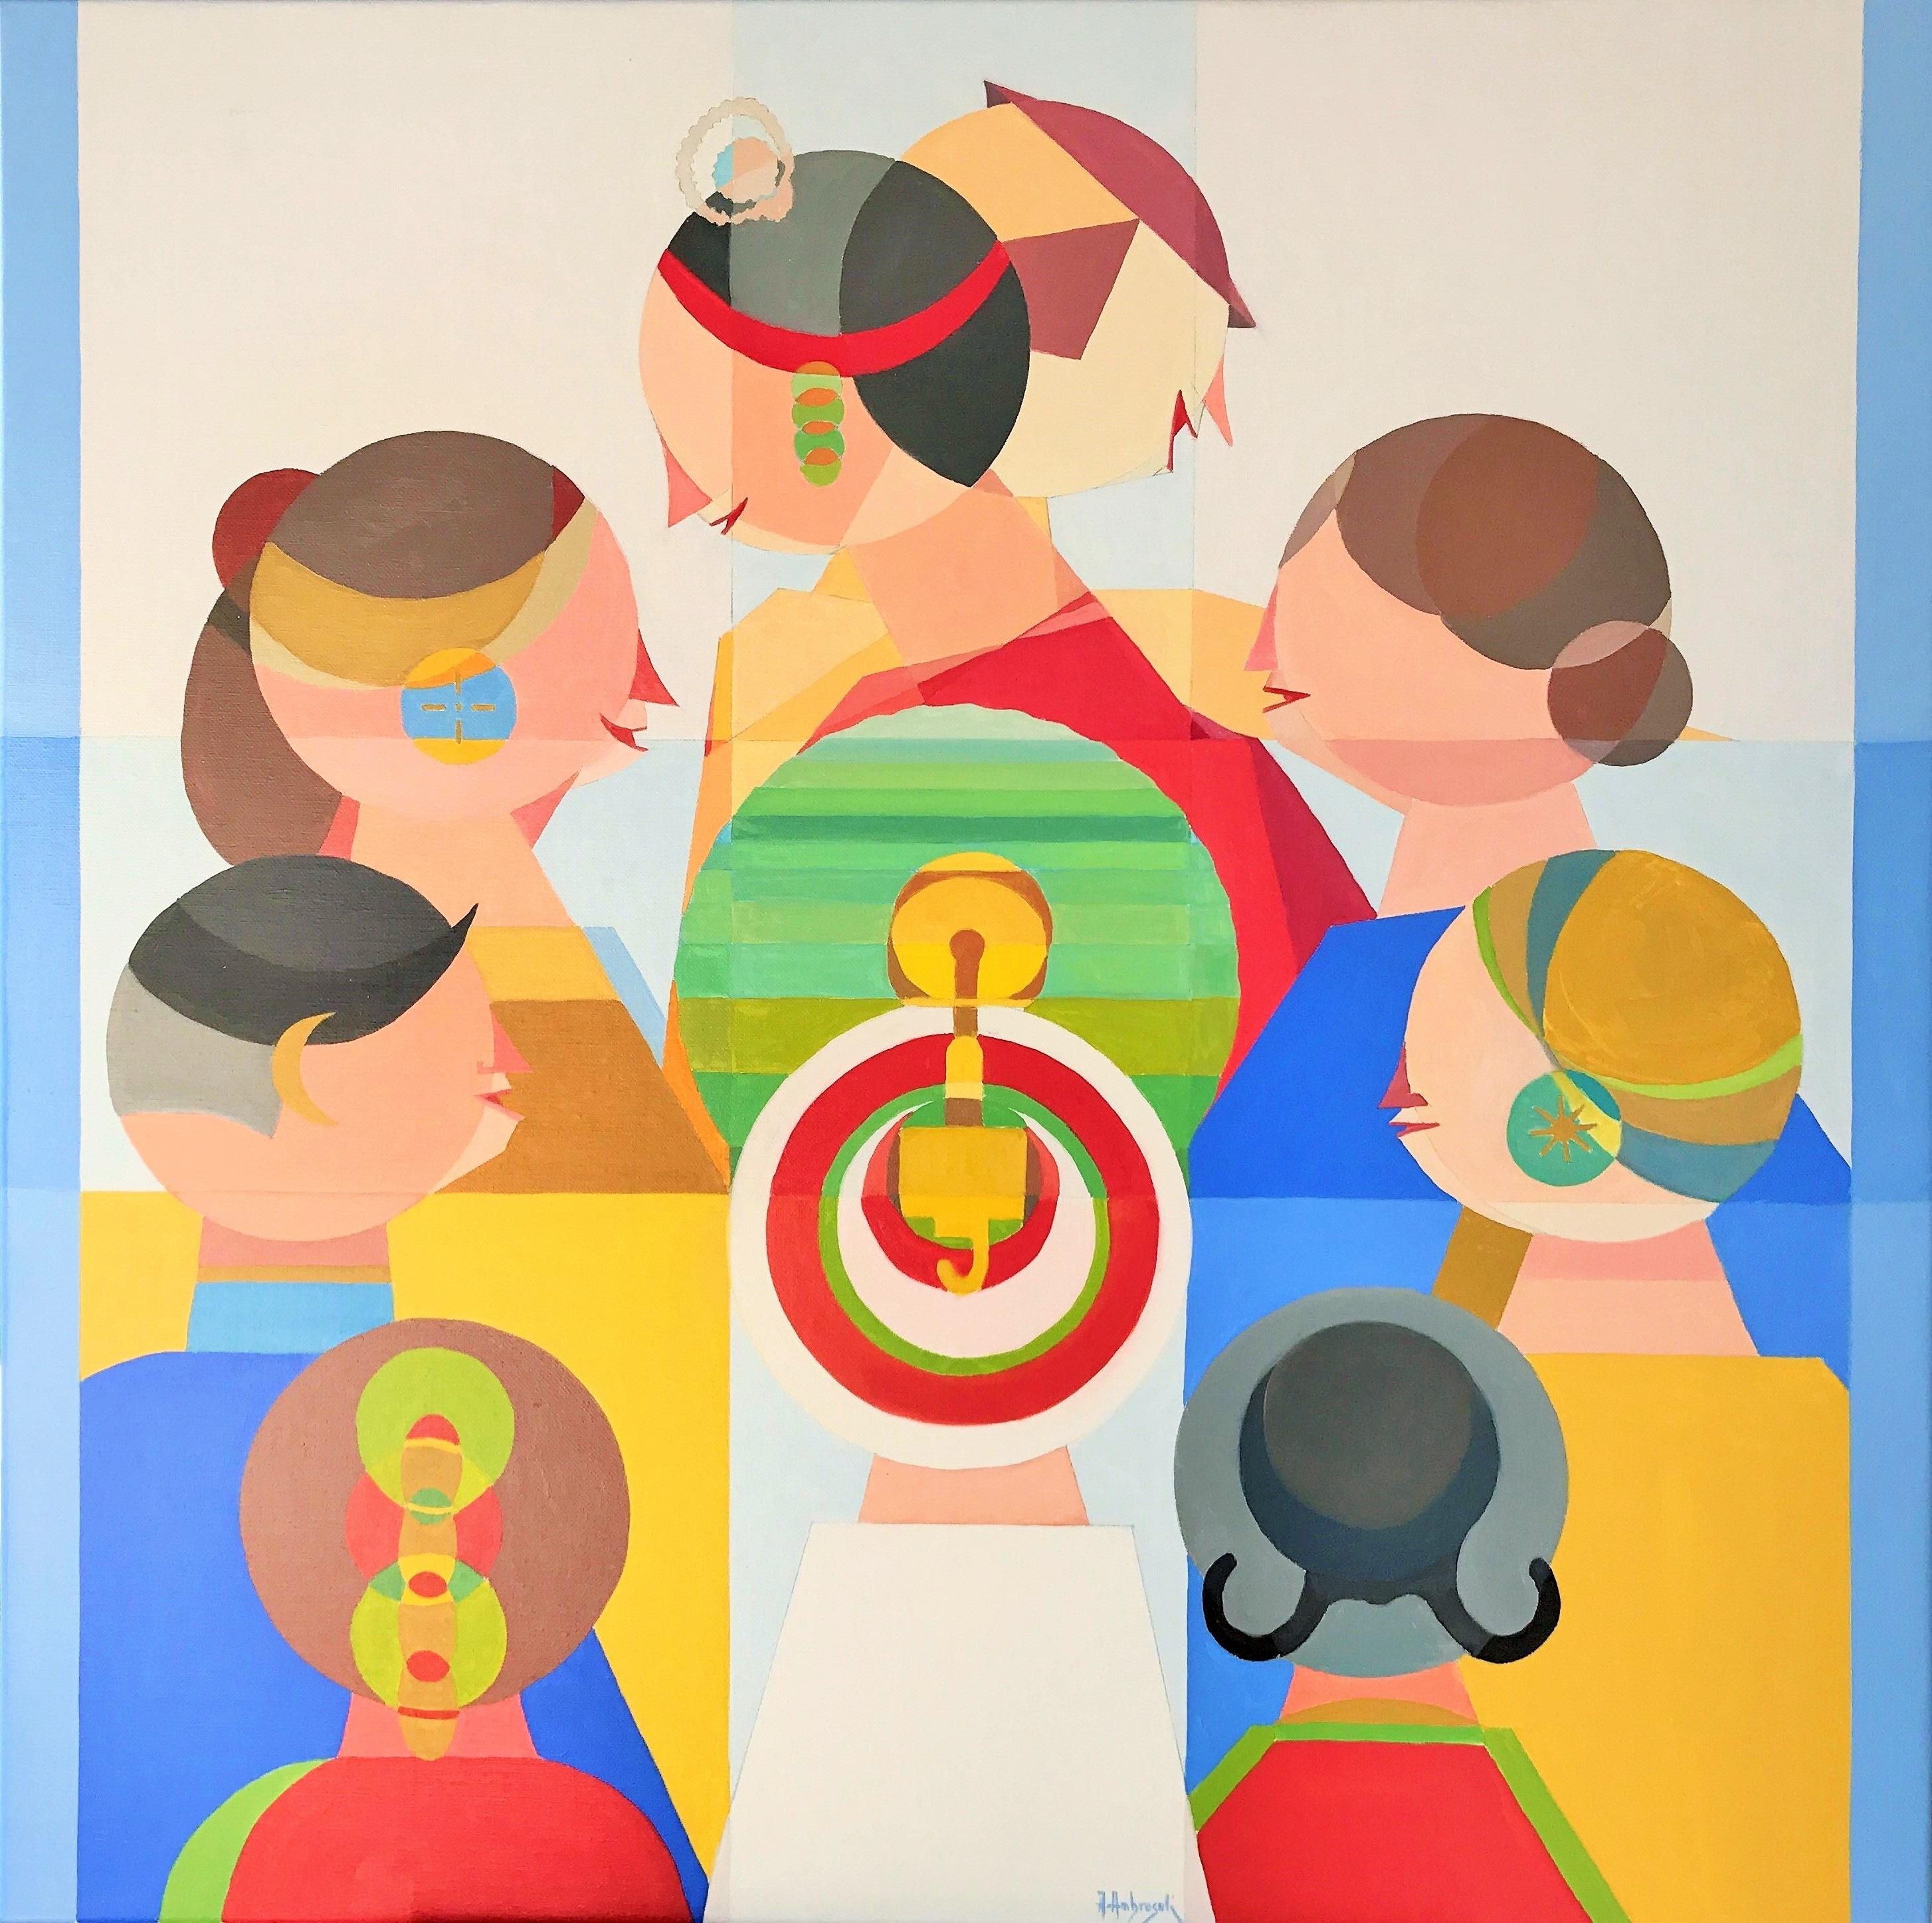 The Round Table (2017), oil on canvas stretched over wooden frame, 85x85 cm, by Italian contemporary artist Annemarie Ambrosoli (ICA - International Certified Artist)

The inspiration for this painting was a round table where people were chatting